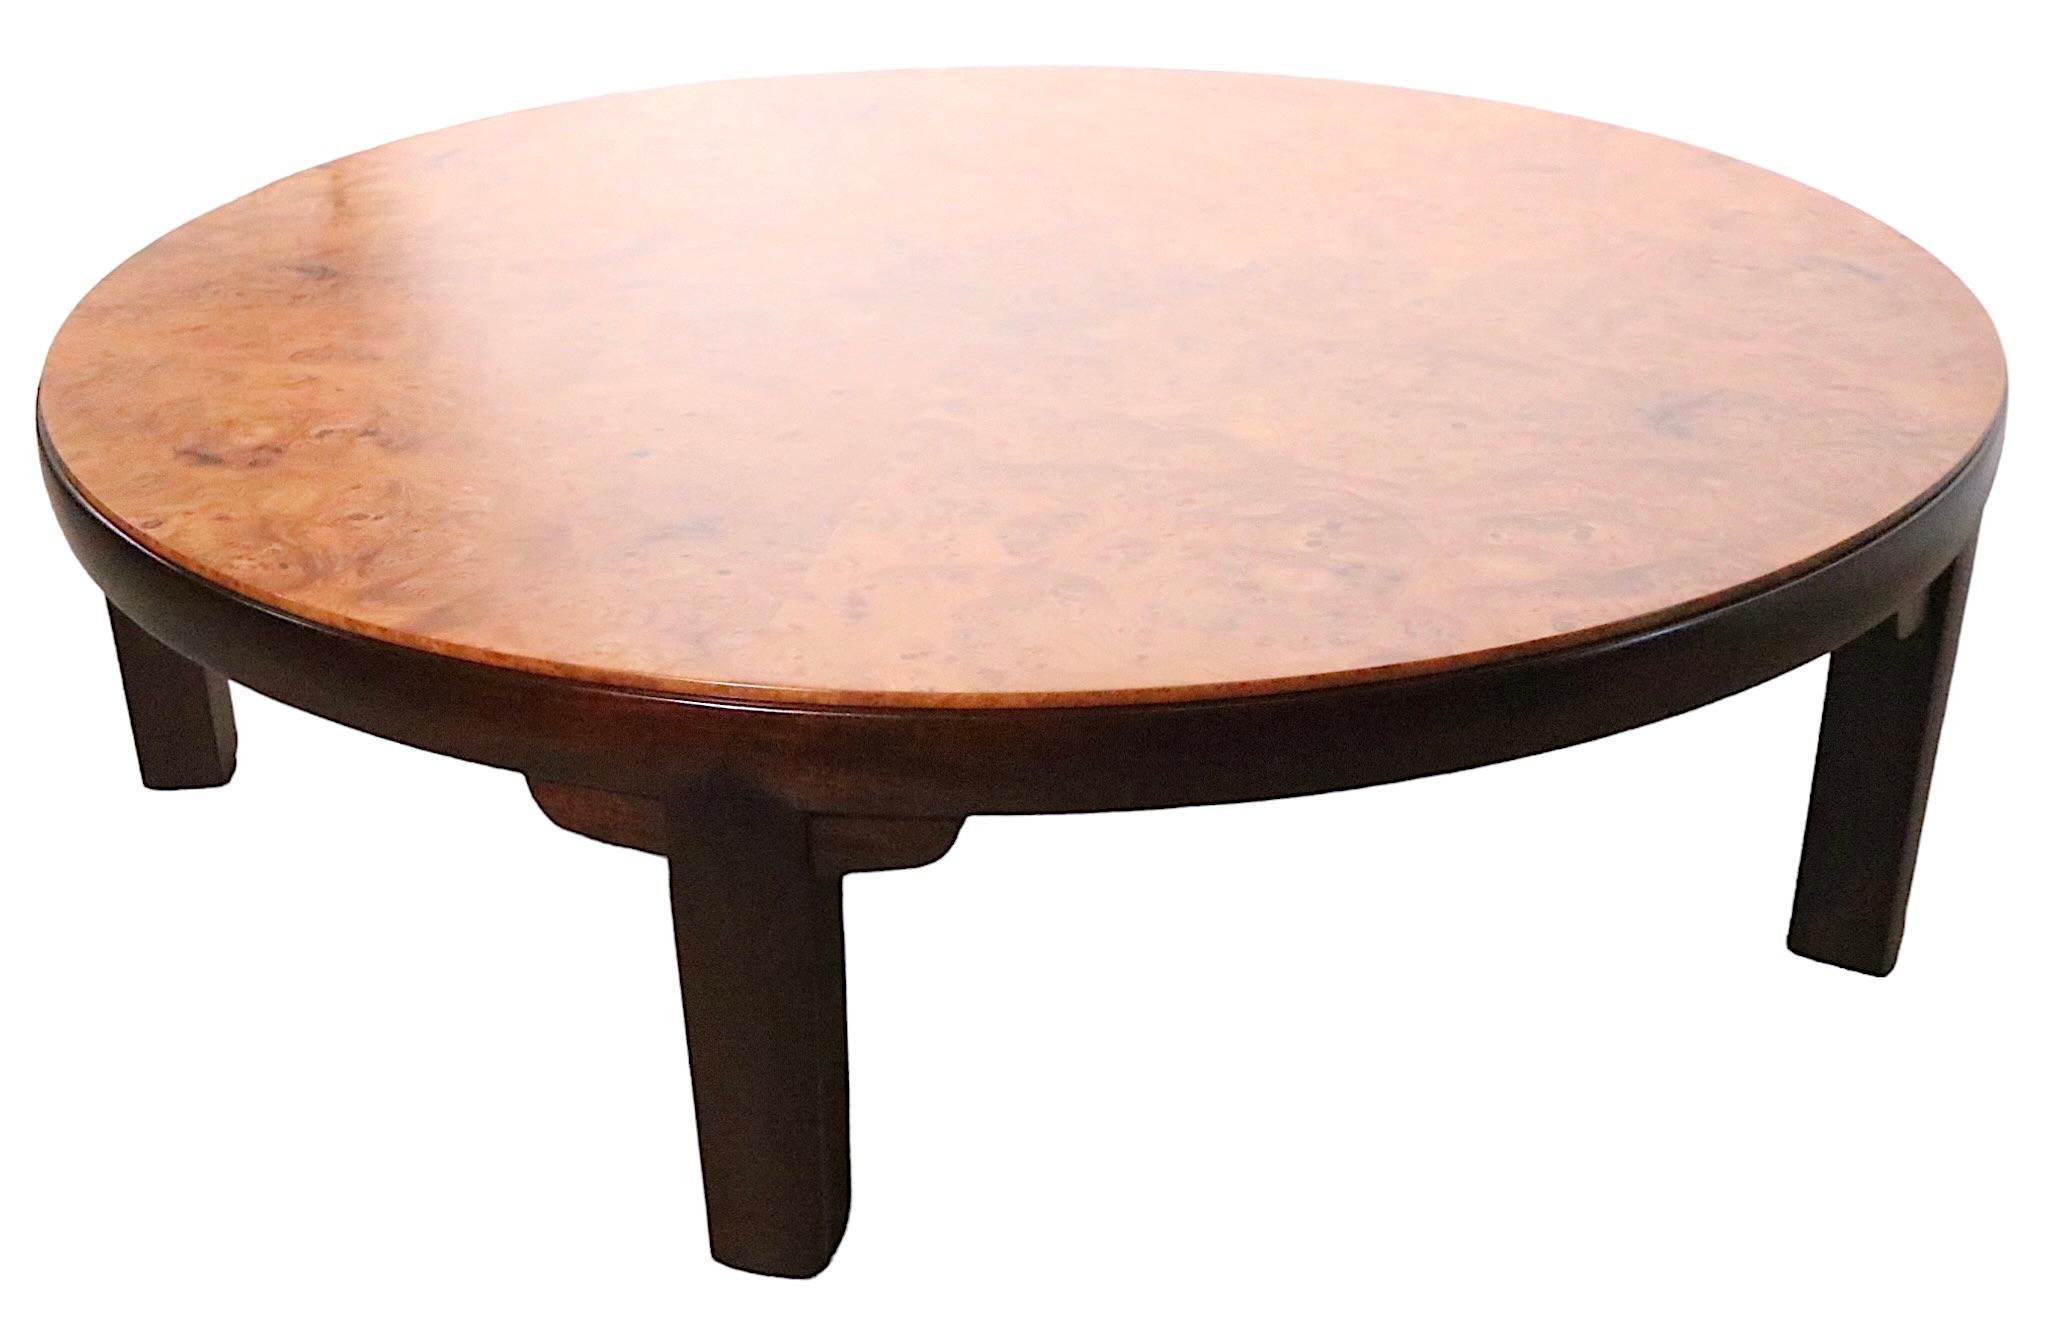 Rare midcentury coffee table, designed by Edward Wormley for Dunbar. The table features a stunning top of blonde carpathian burl, on a dark walnut base. The table has been newly professionally refinished, and is in spectacular condition.
Impressive